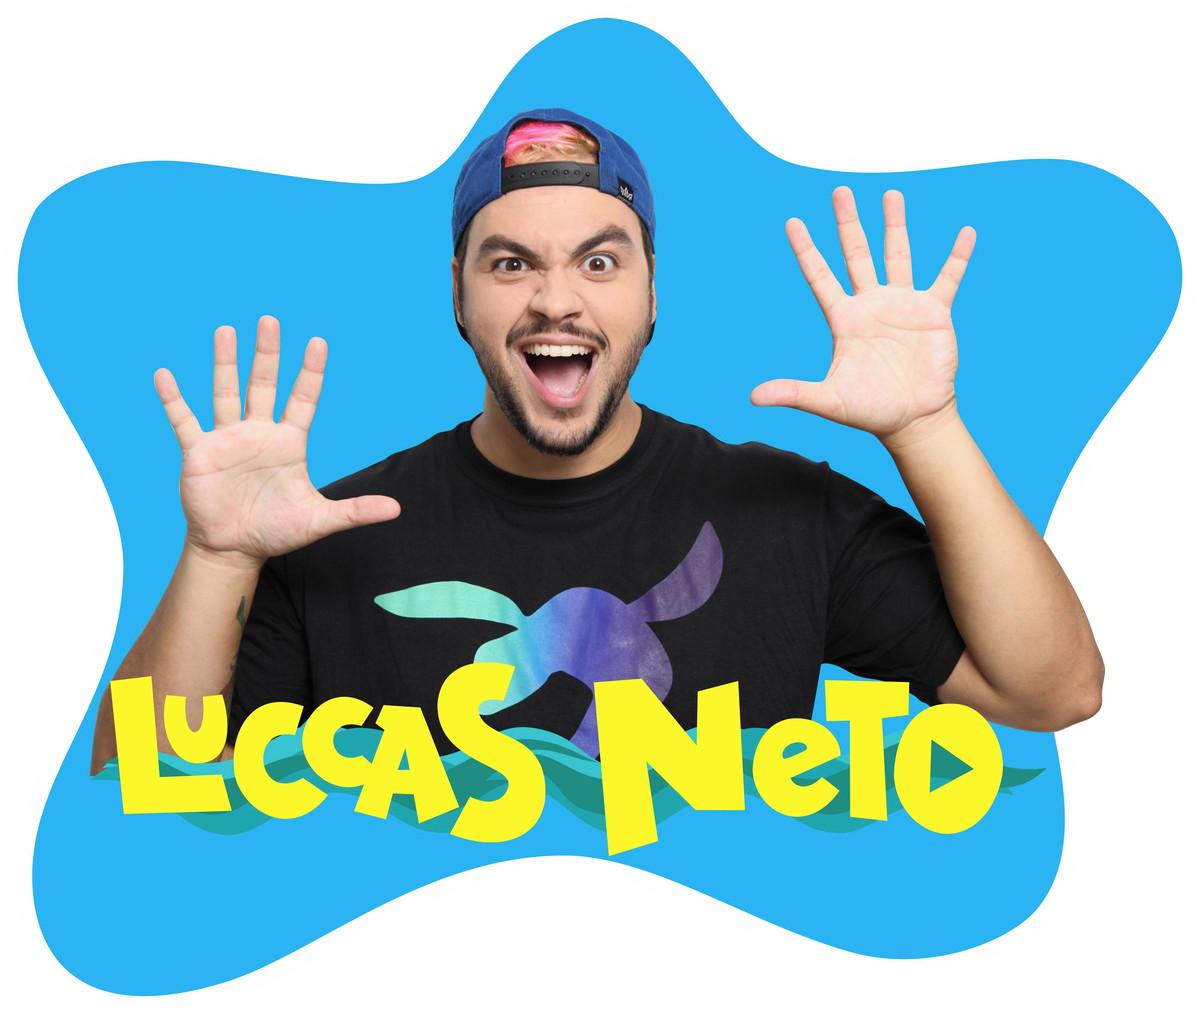 Luccas Neto Wallpapers - Wallpaper Cave